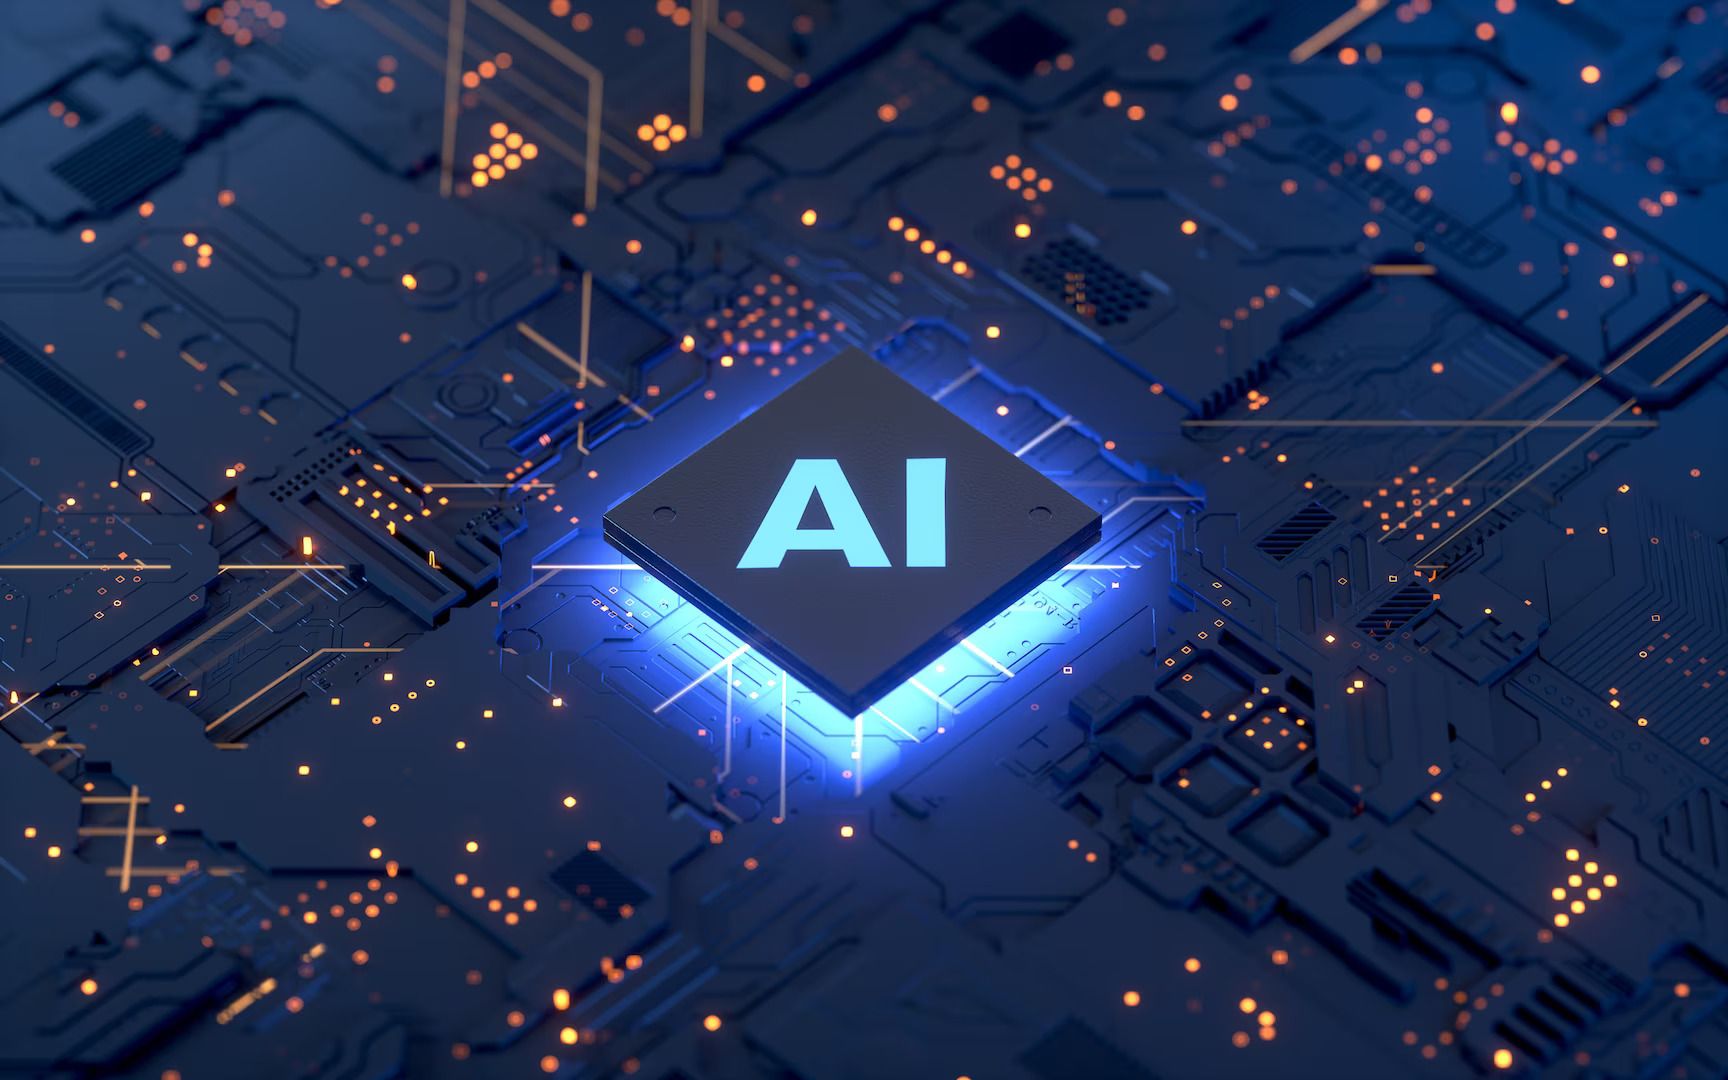 AI on a computer chip surrounded by a circuit board.